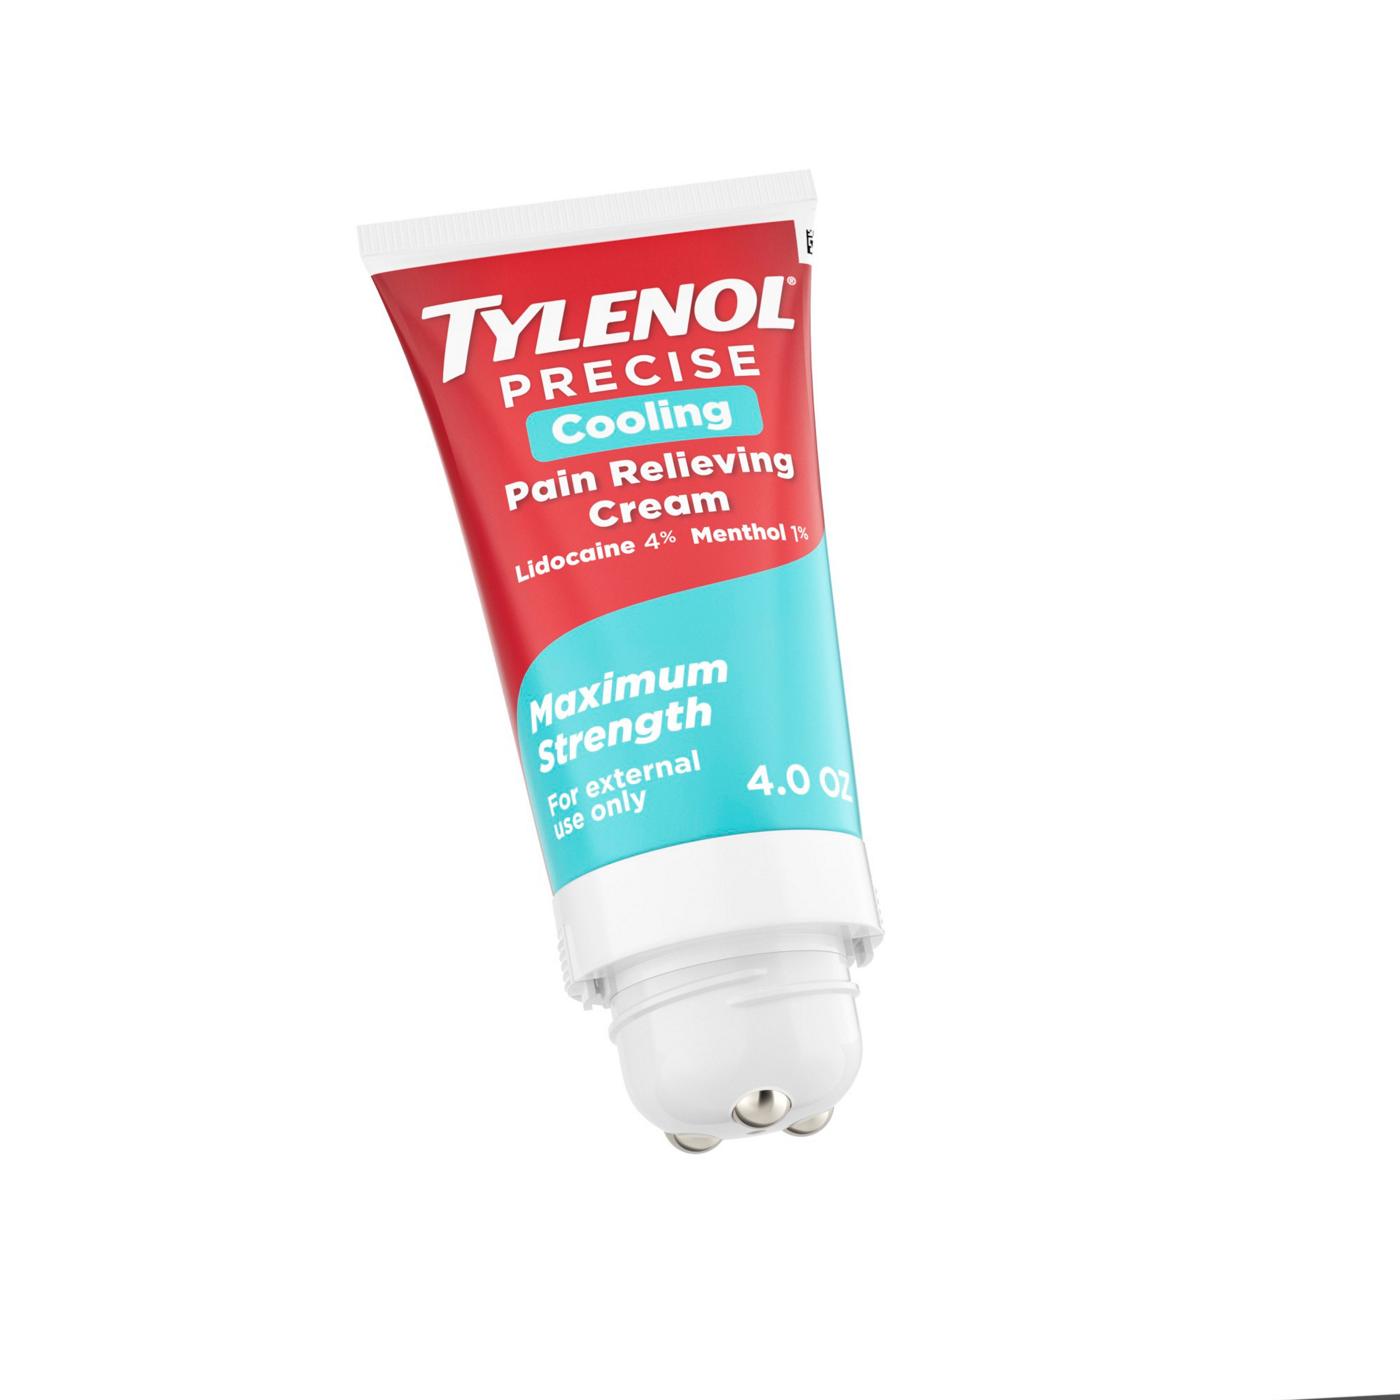 Tylenol Precise Cooling Pain Relieving Cream; image 5 of 6